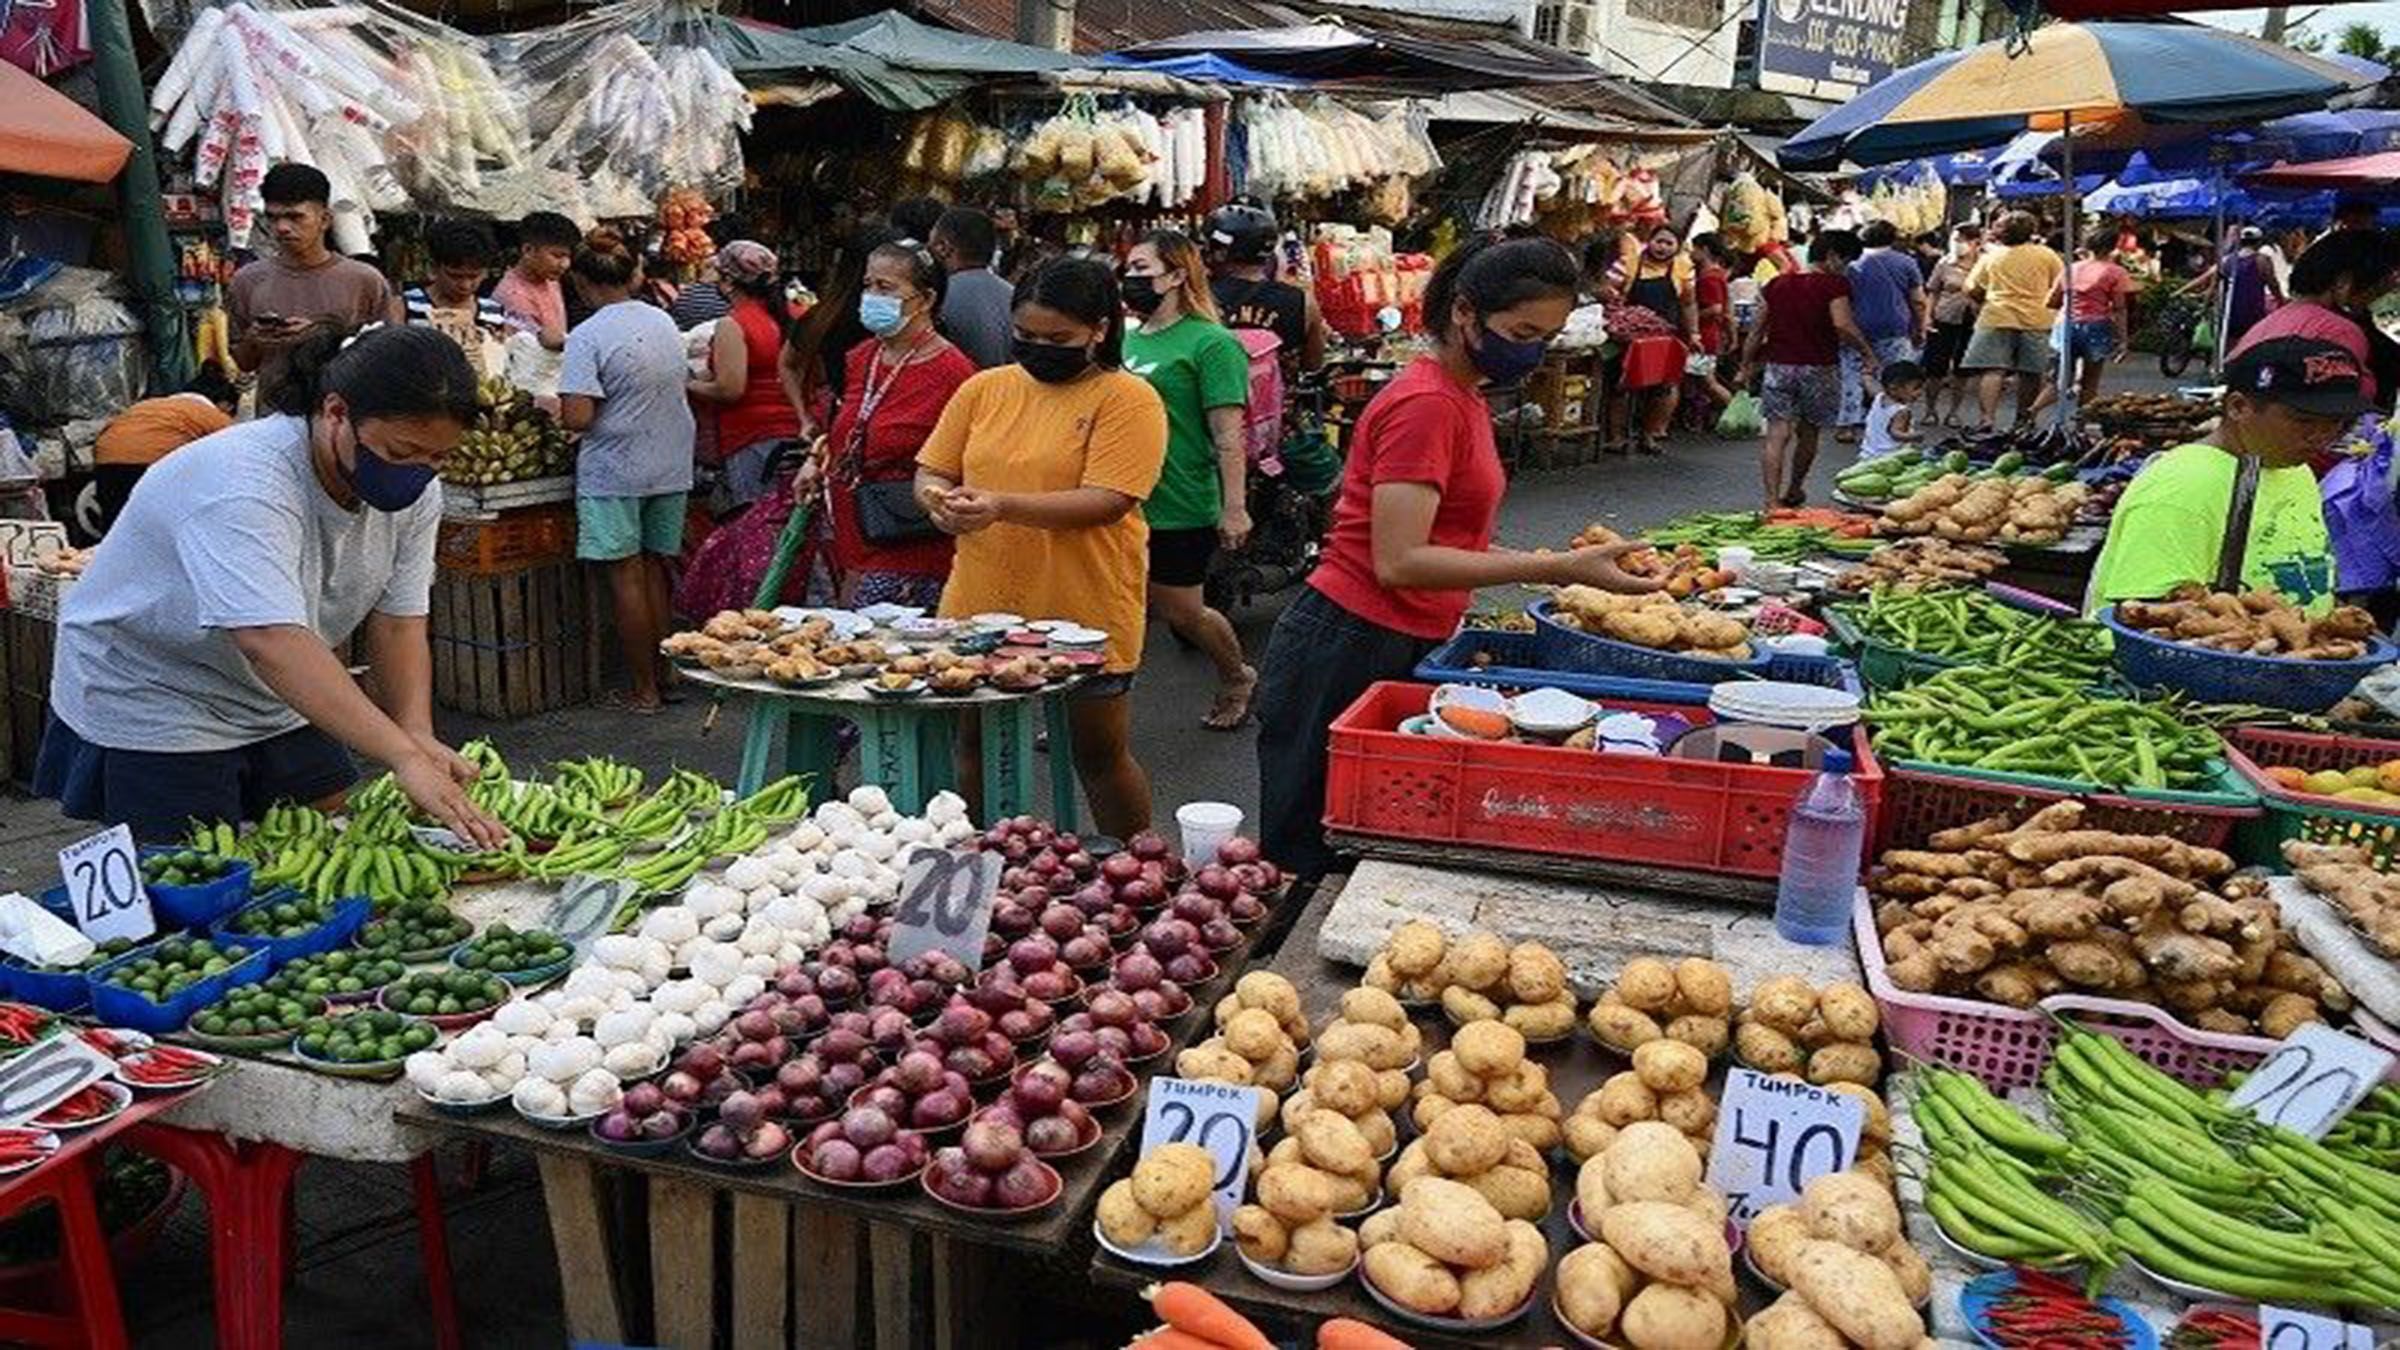 Filipino households take on inflation